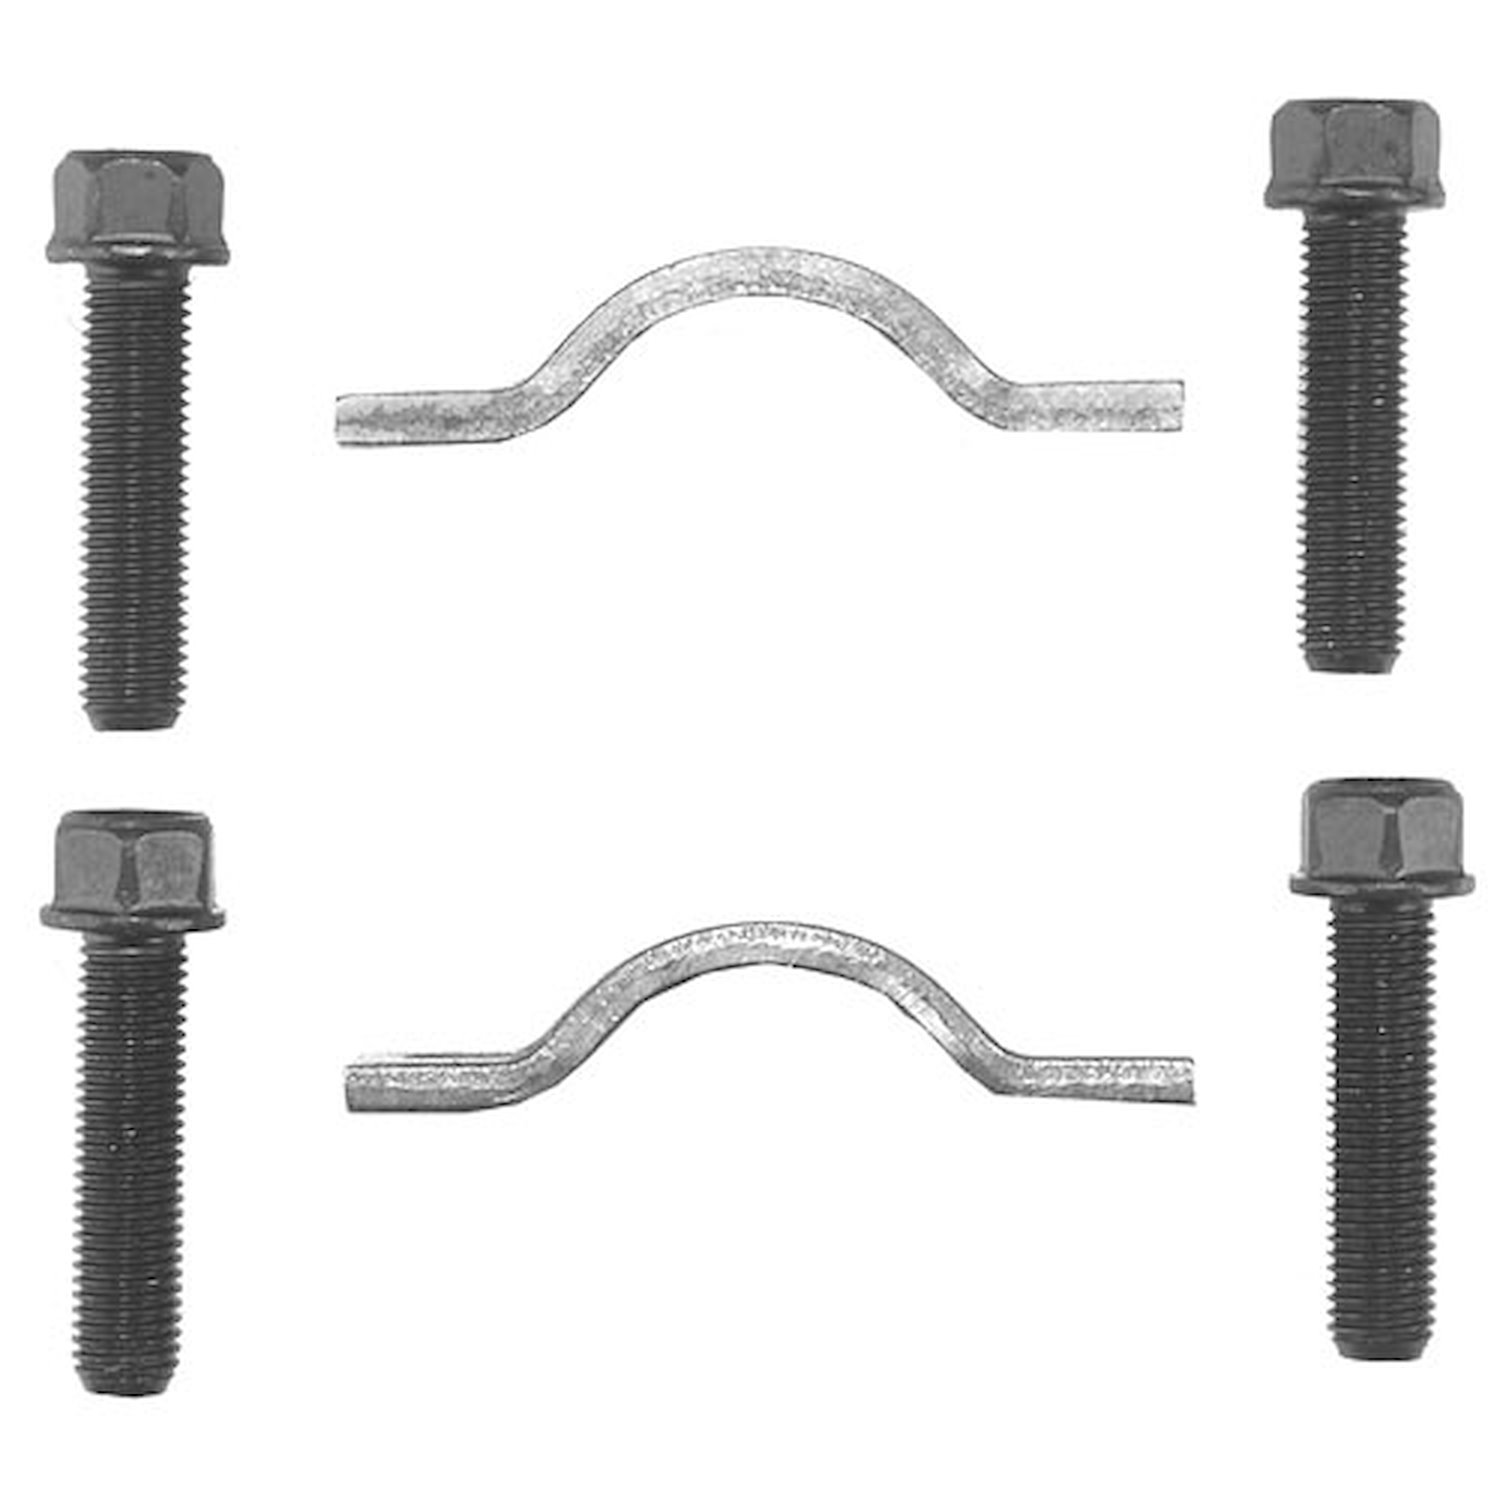 U-Joint Clamp Kit with Hardware for Select 1975-2014 GM Models